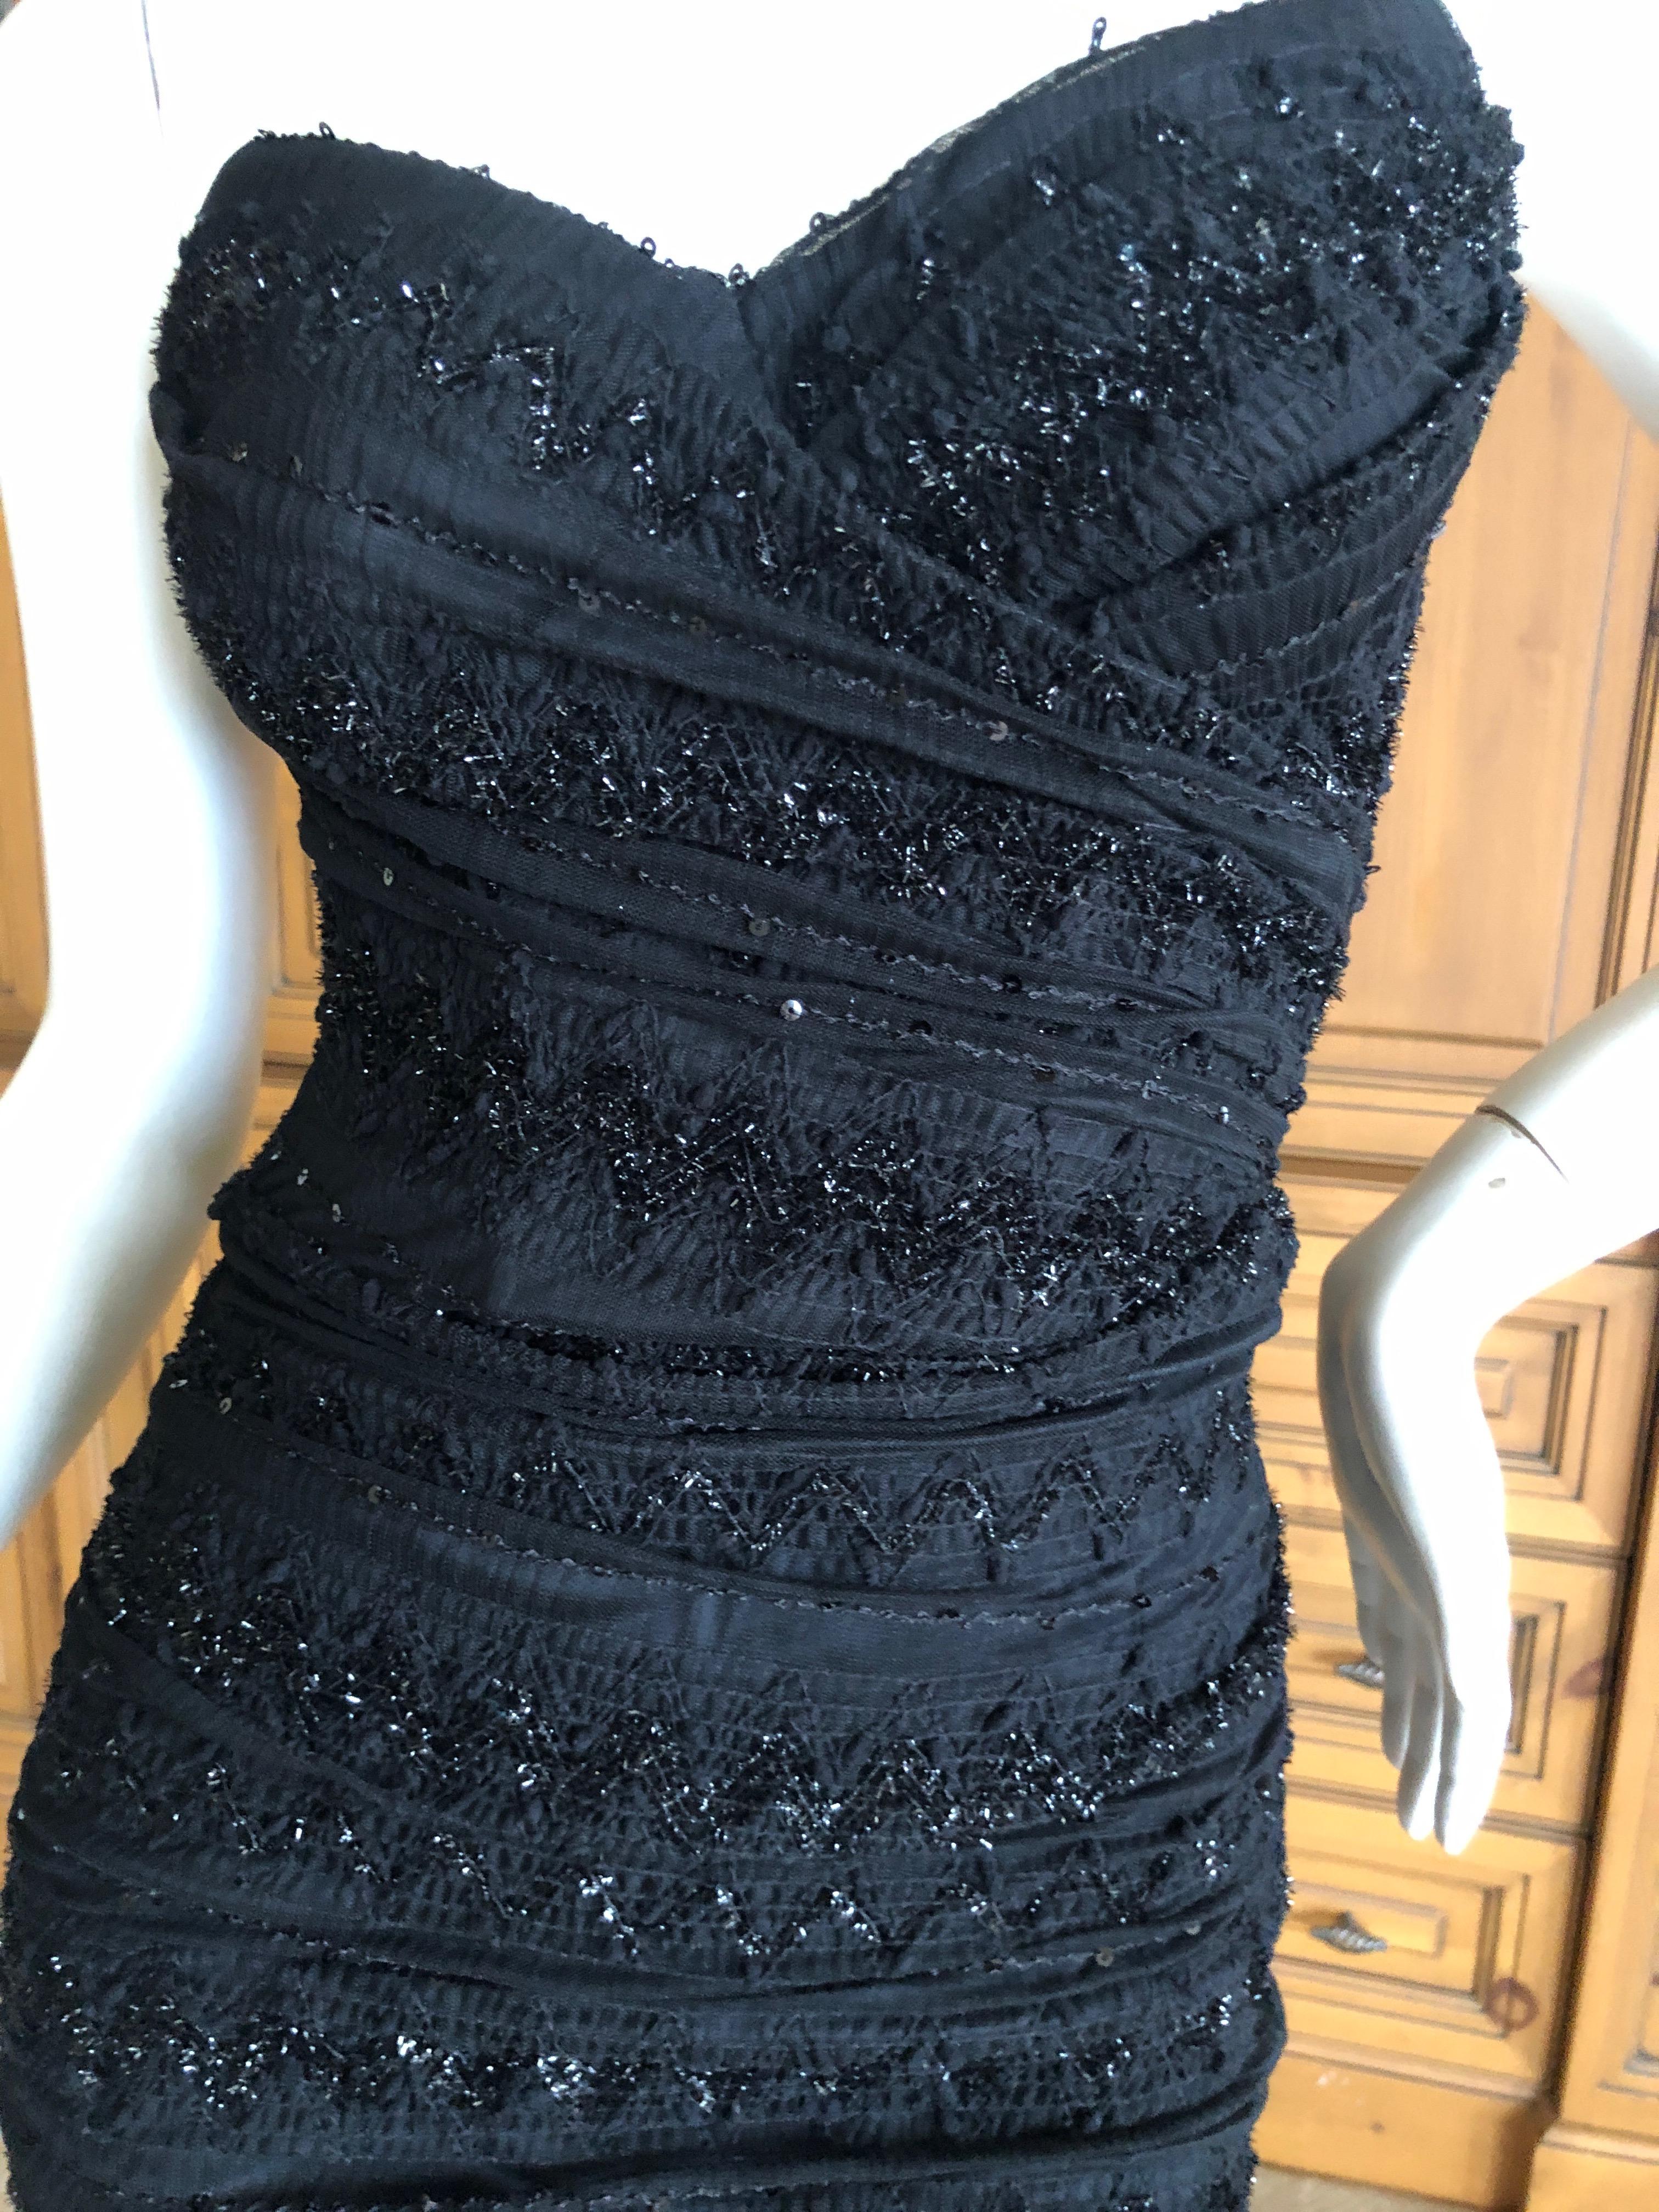 Dolce & Gabbana Vintage Black Strapless Tinsel Cocktail Dress with Inner Corset
So pretty, there is shiny tinsel like embellishment
There is  a lot of stretch
Size 38
Bust 32